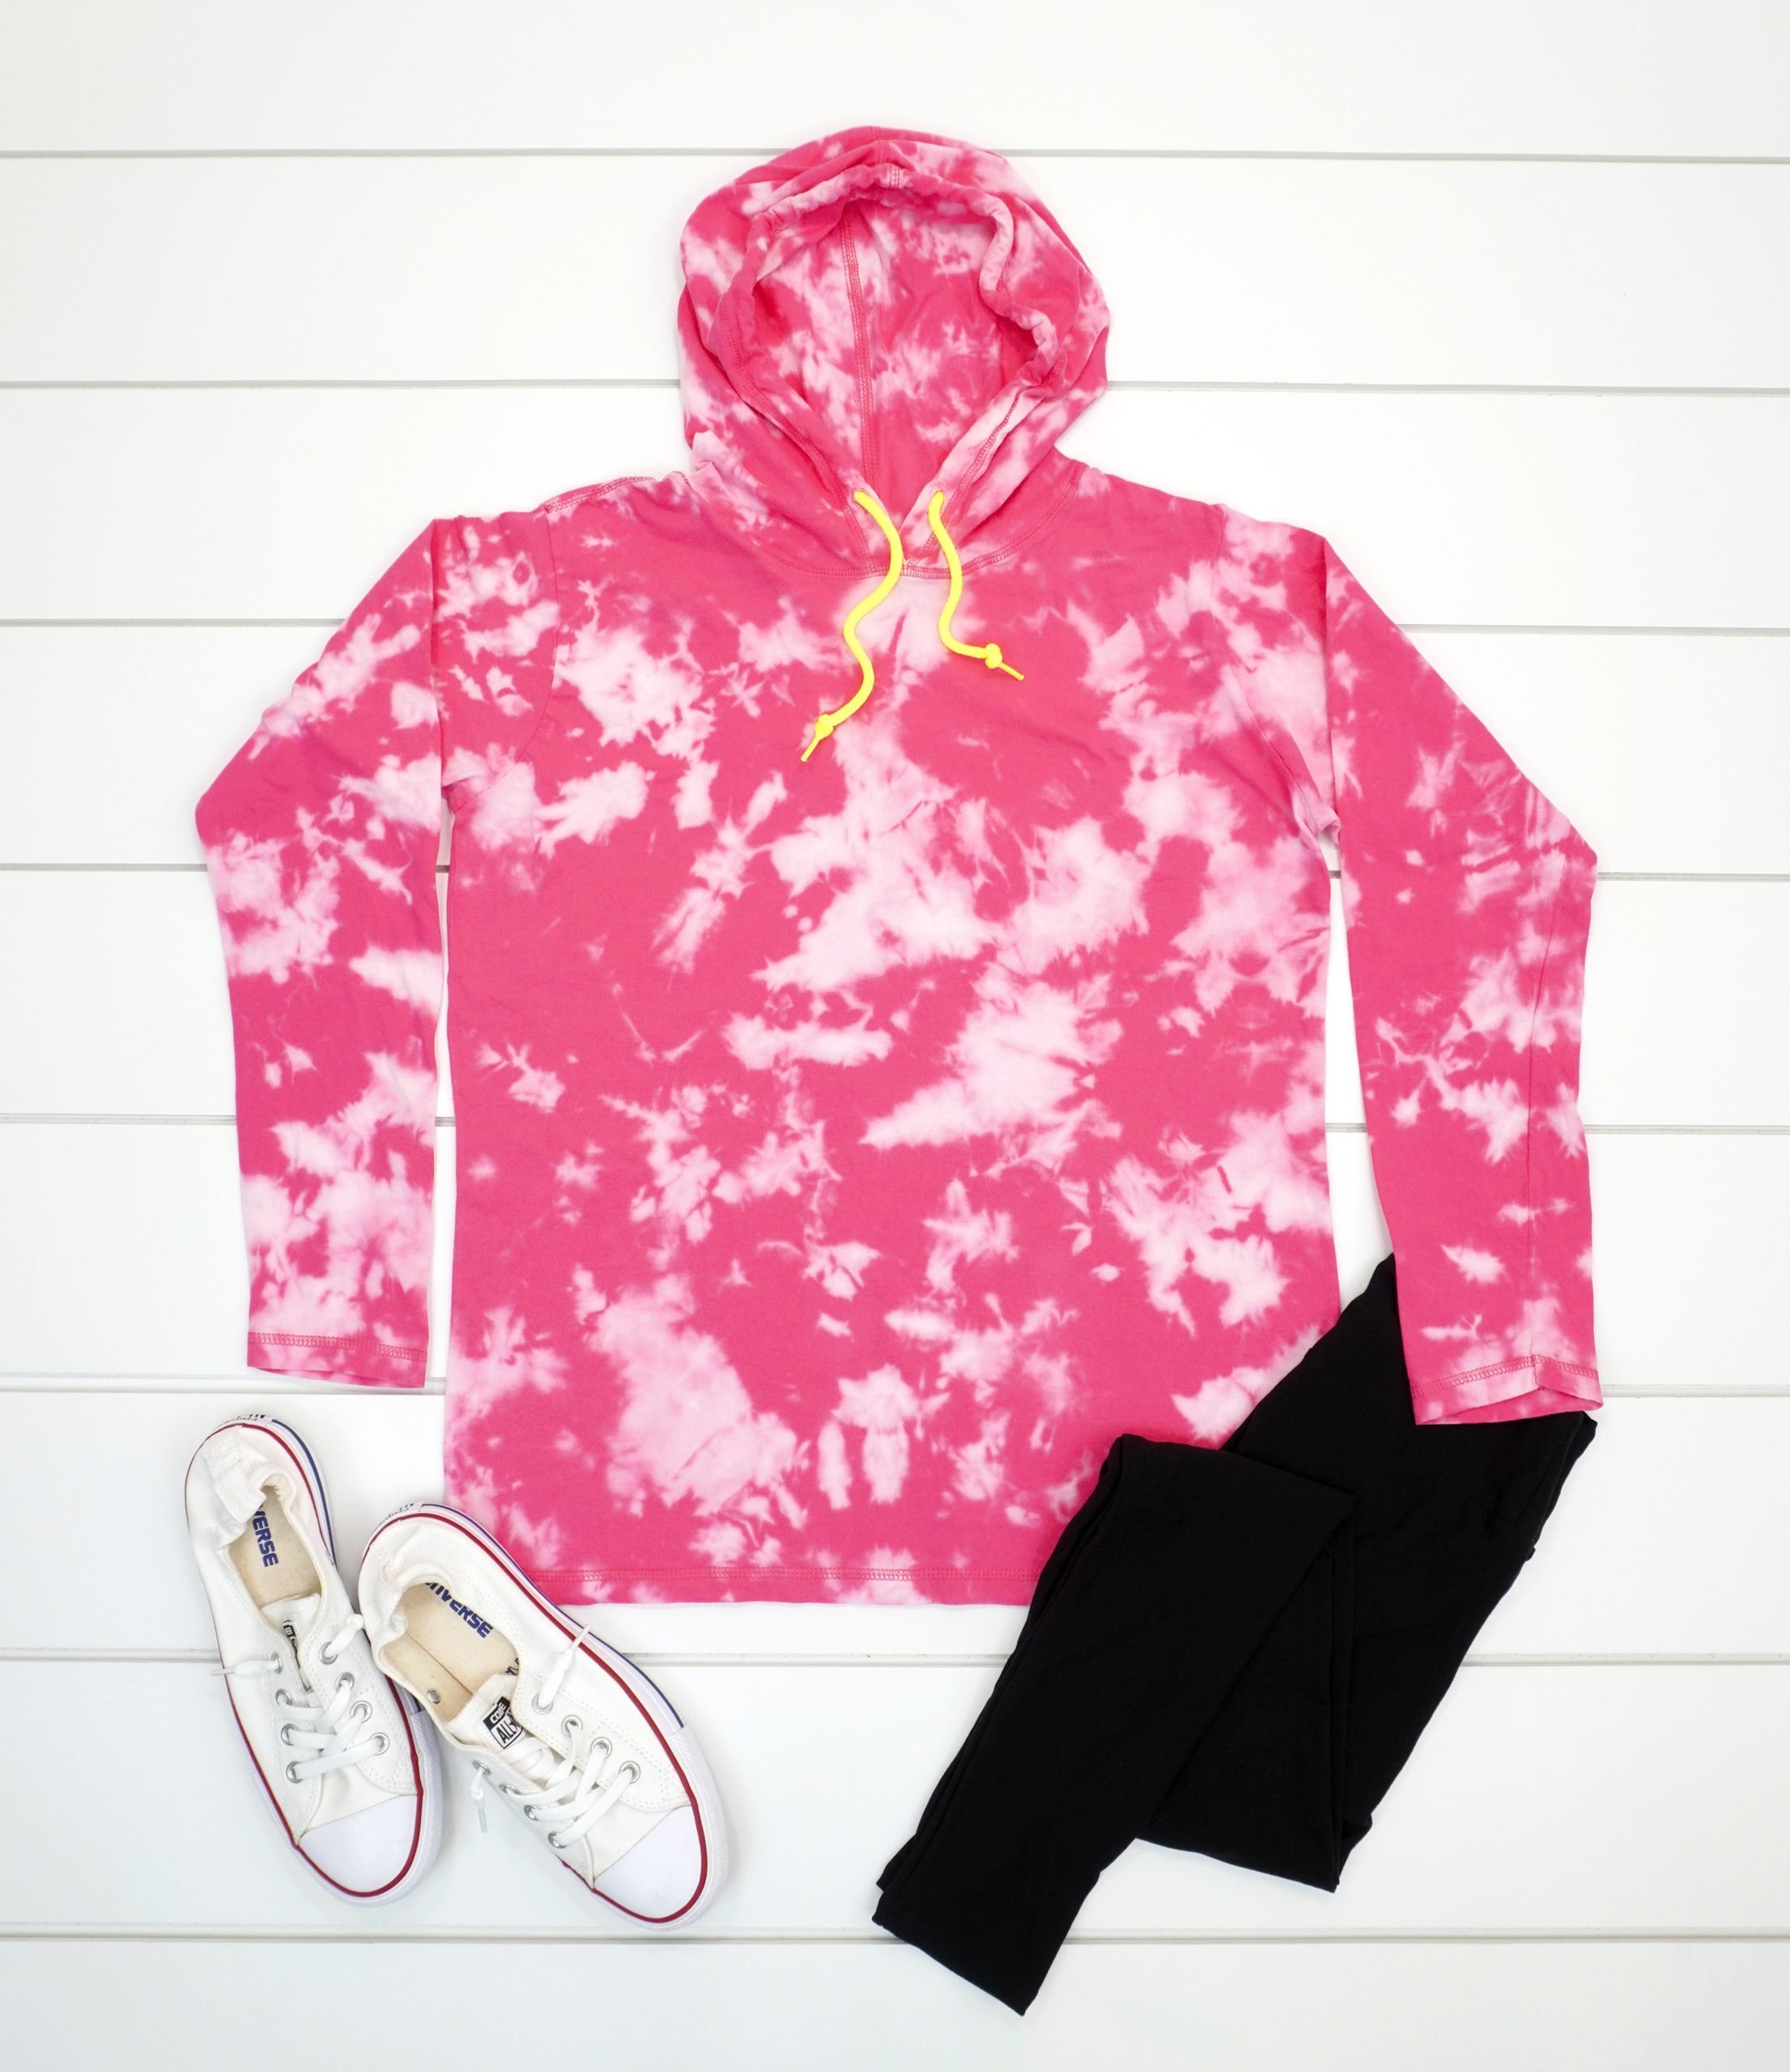 Pink bleach tie dye hoodie with outfit on white wood background